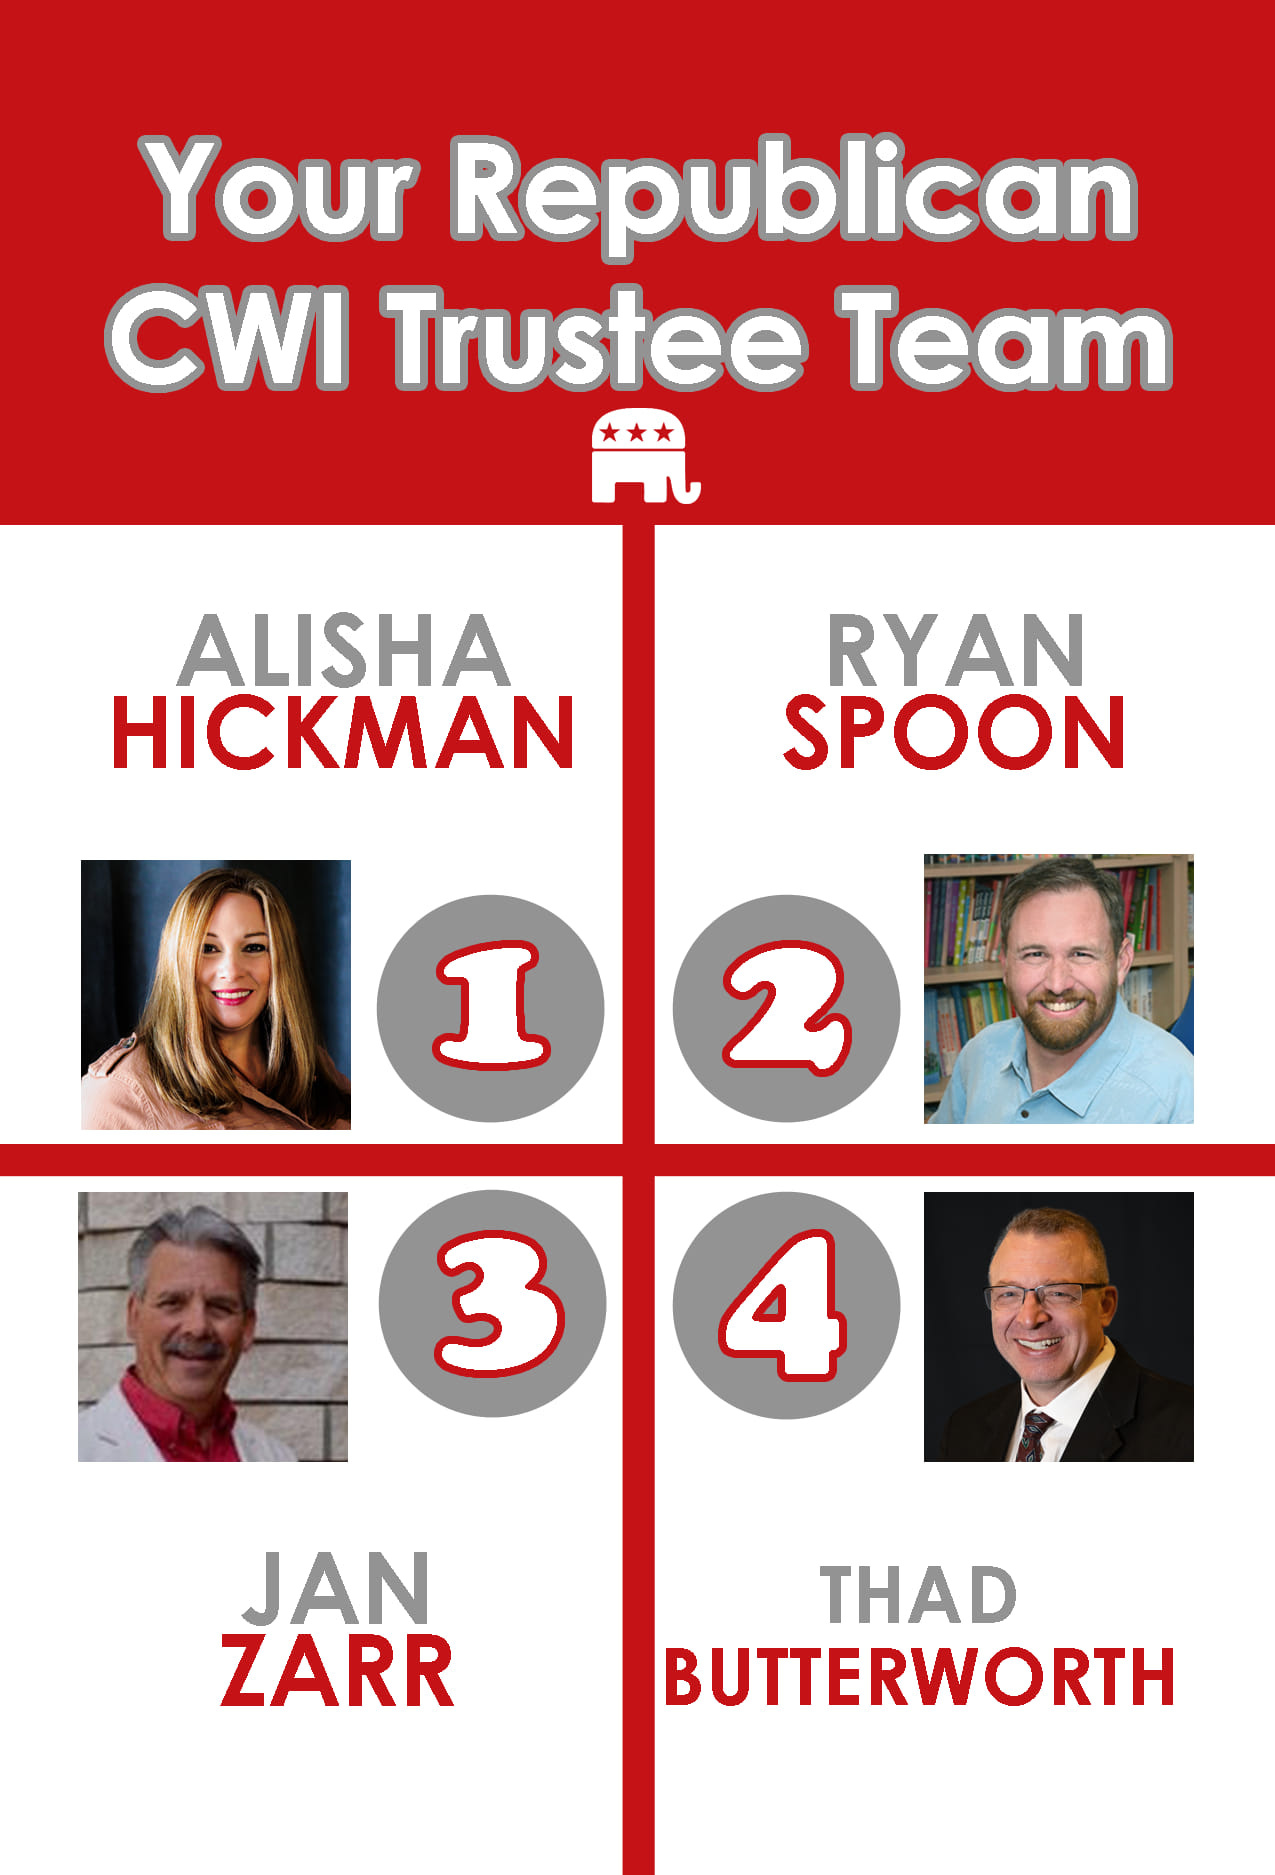 May be an image of 4 people and text that says 'Your Republican CWI Trustee Team ALISHA HİCKMAN RYAN SPOON 1 2 3 4 JAN ZARR THAD BUTTERWORTH'